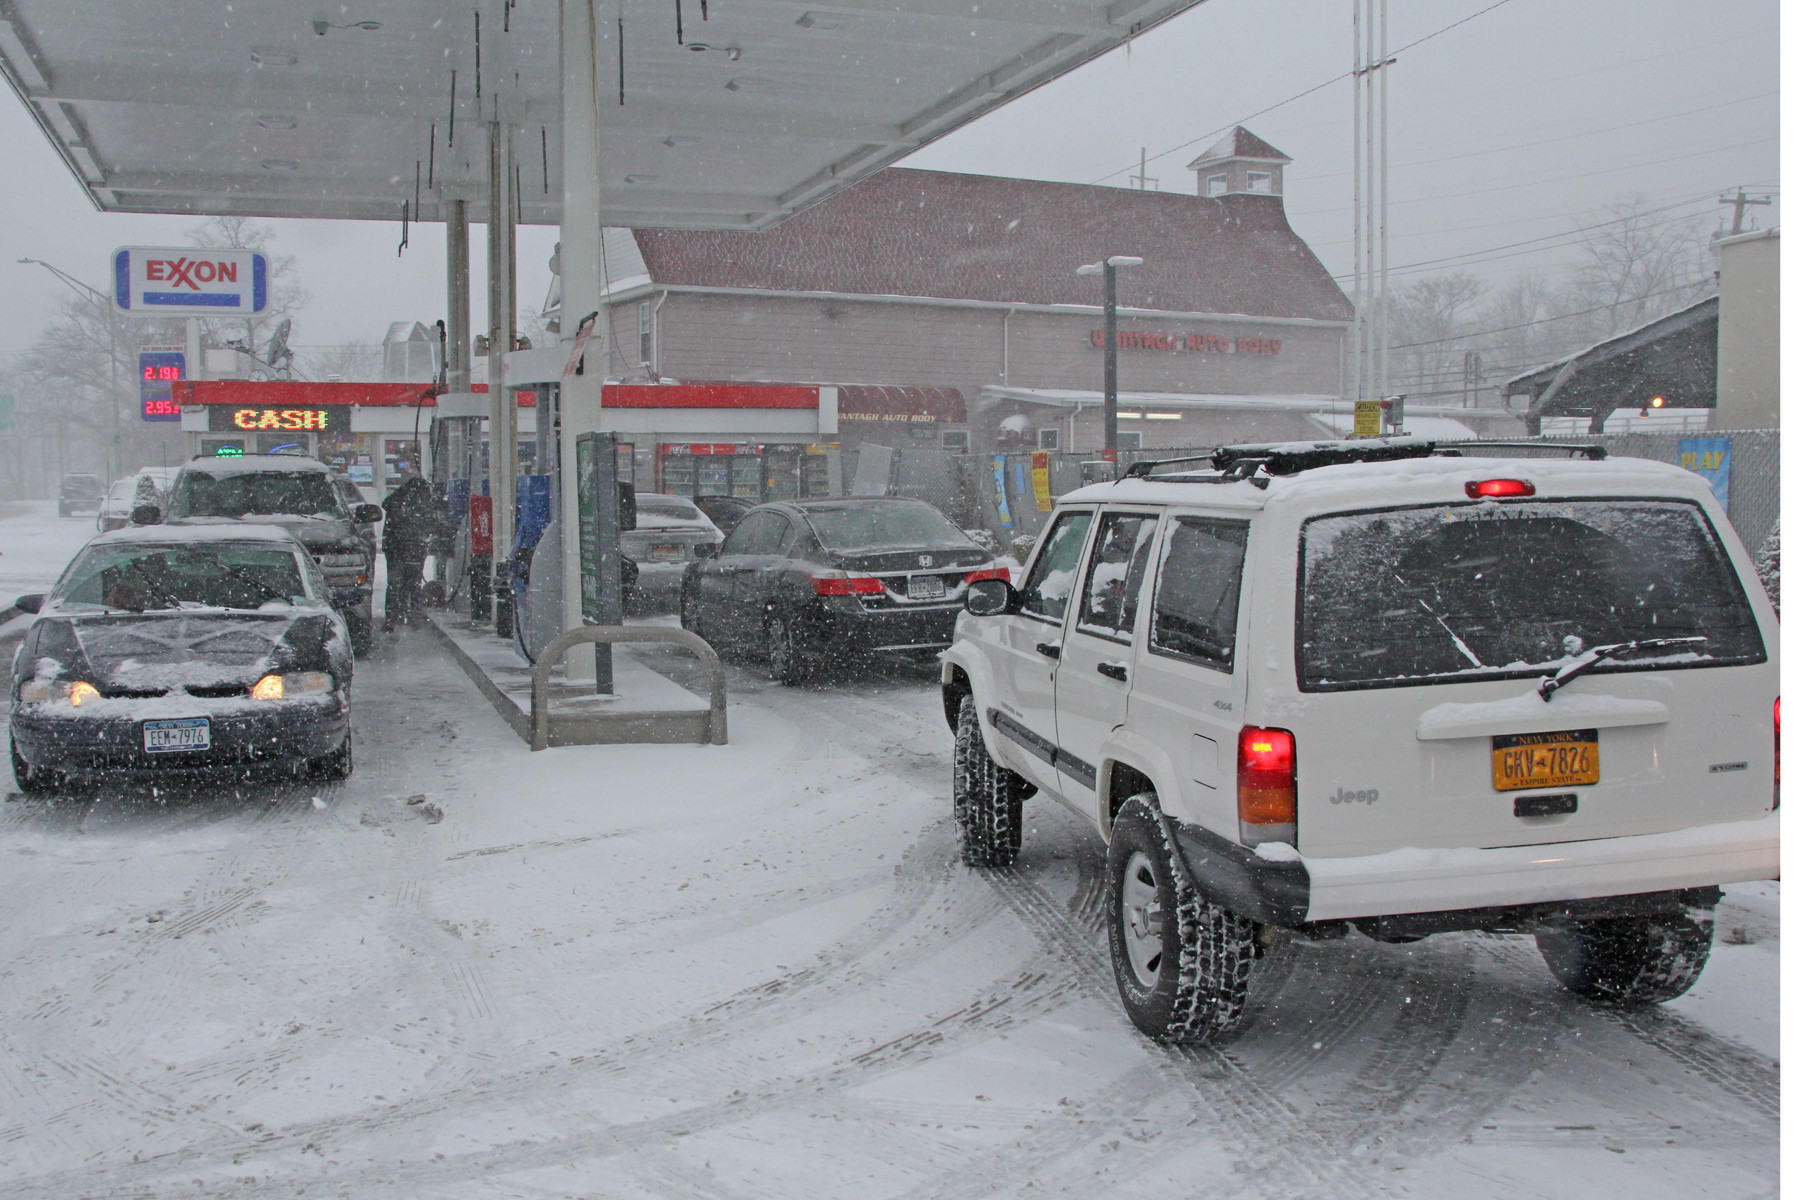 Cars lined up for gas at the Exxon Station on Sunrise Highway and Wantagh Avenue.